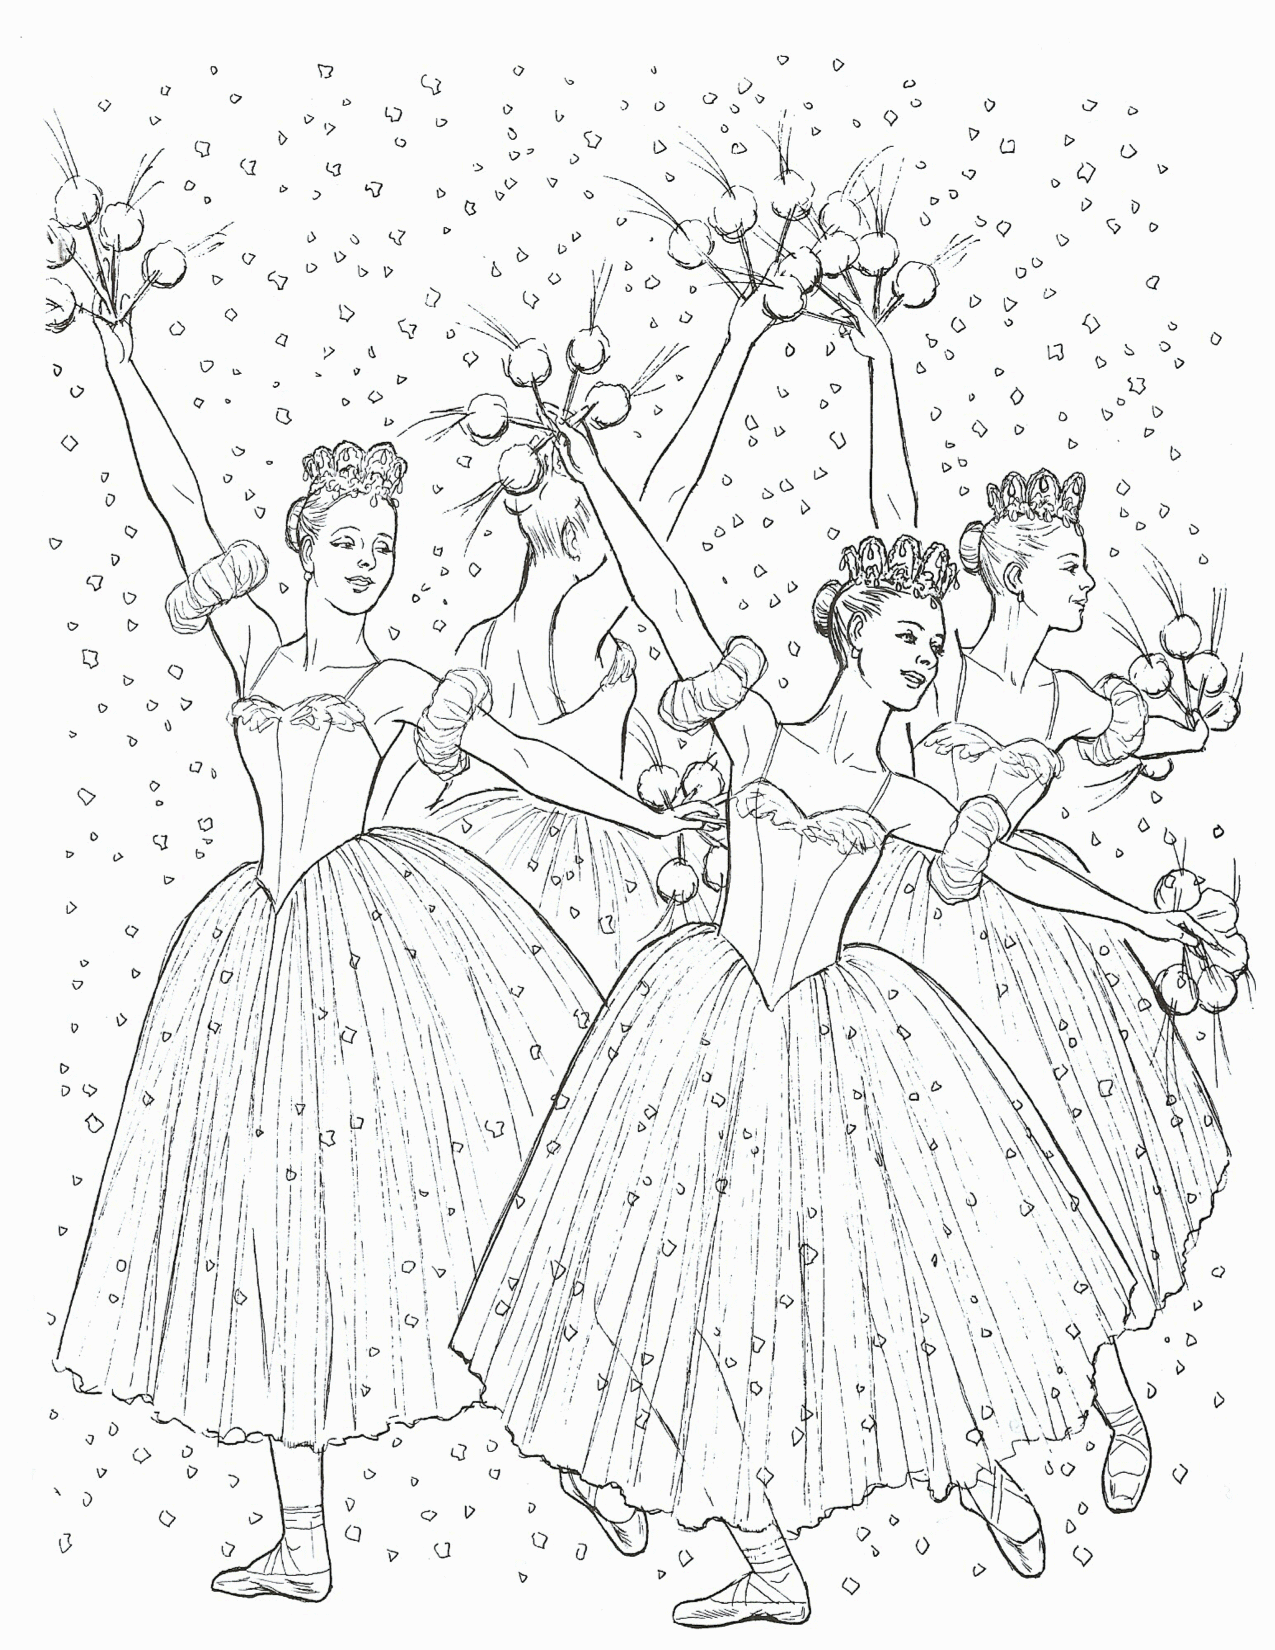 Coloring Pages for Young Dancers | Coloring Pages ...